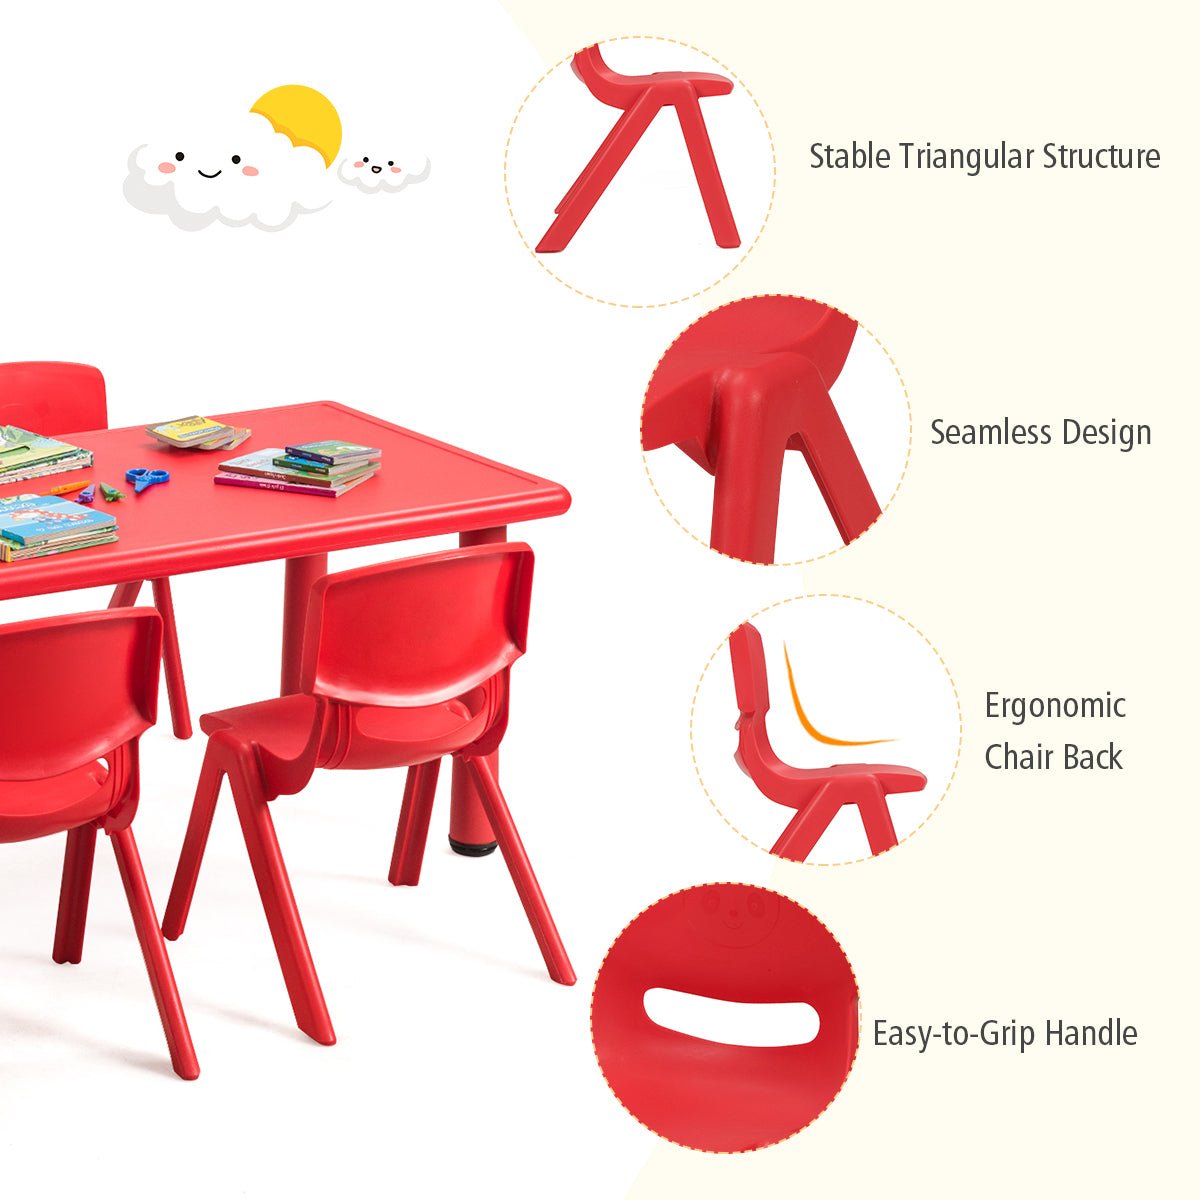 Children's Table and 6 Chairs Set - Playful Learning for Kids